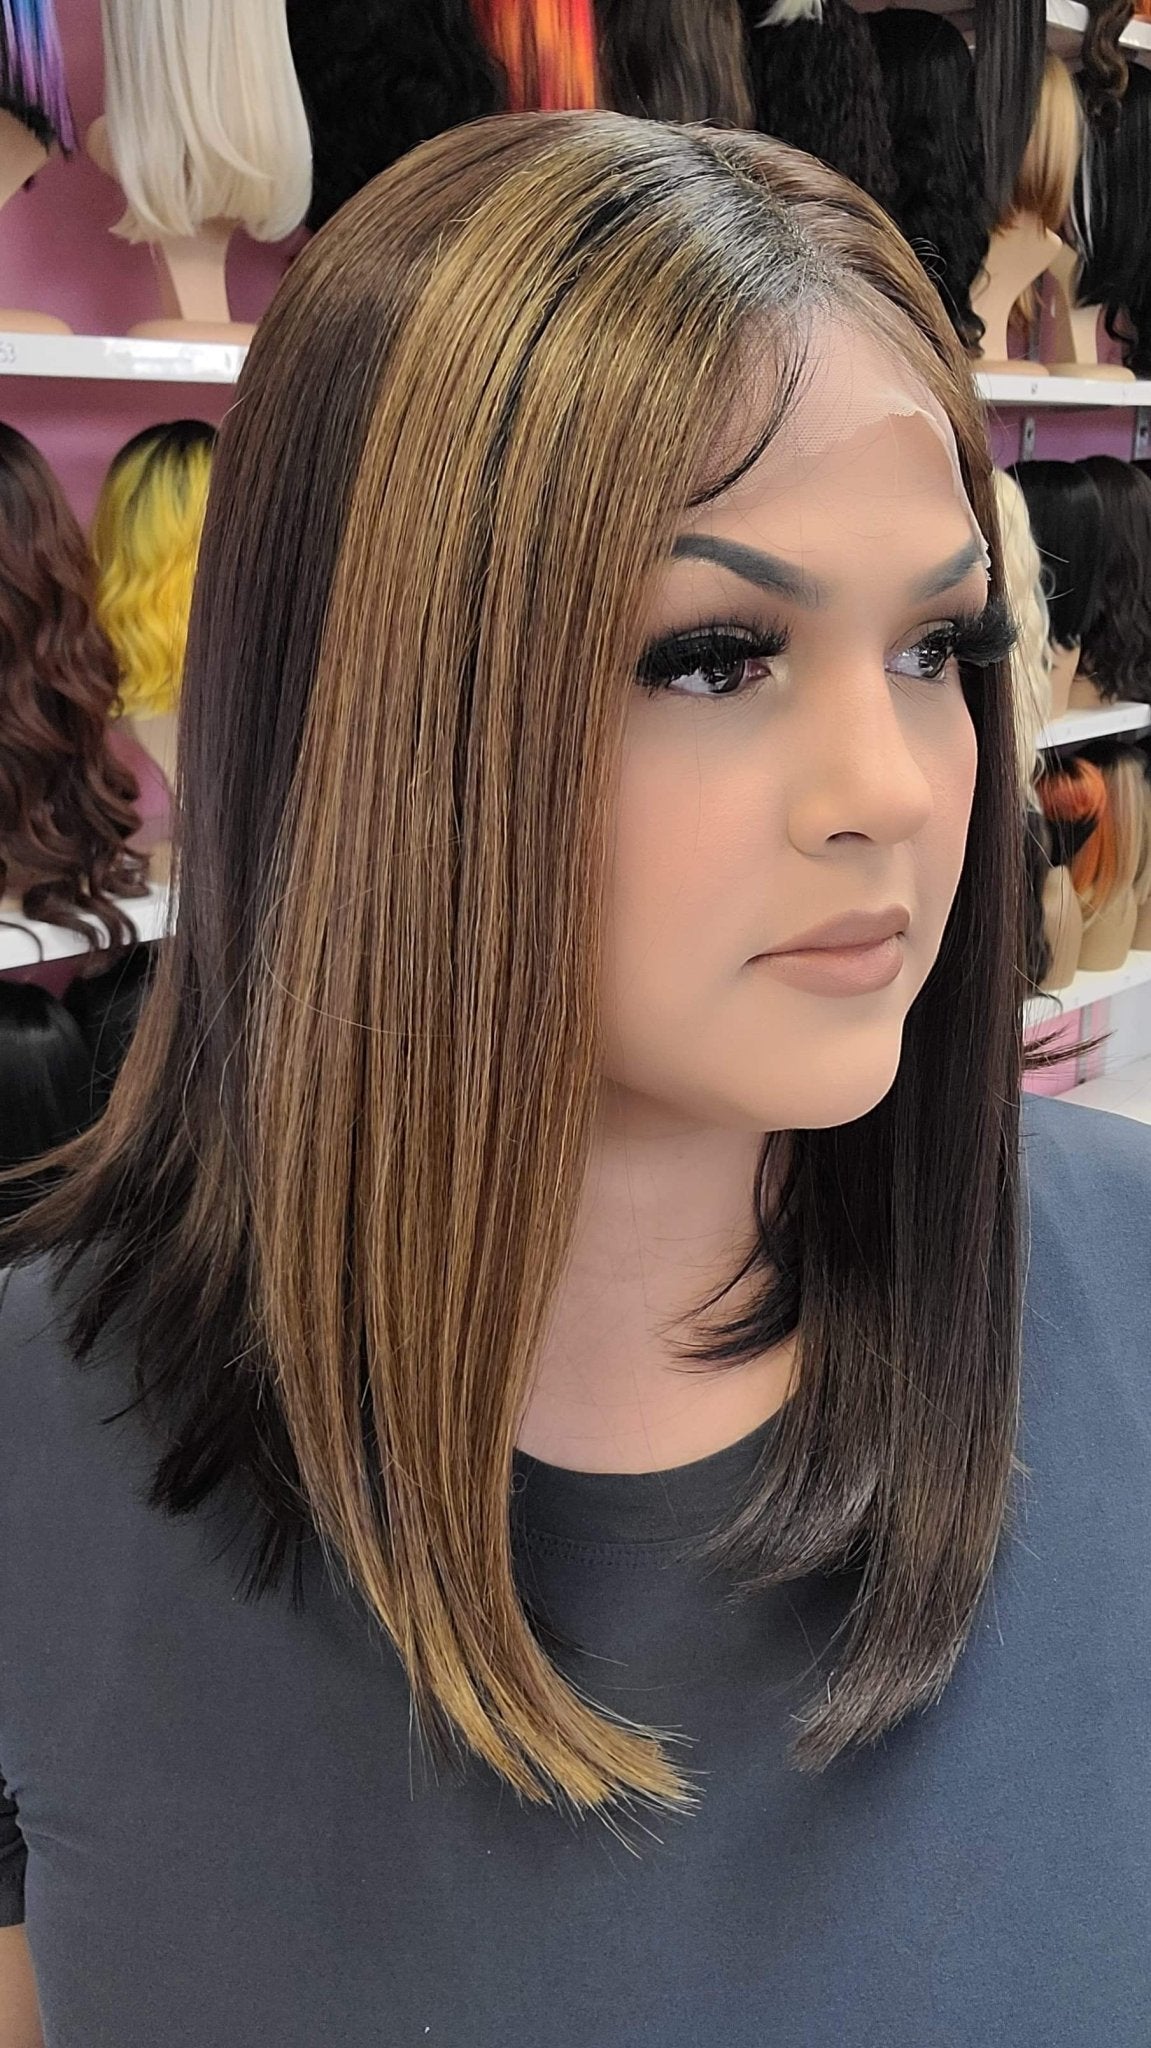 38 Tokyo - Middle Part Lace Front Wig - 4/1B/30/27 - DaizyKat Cosmetics 38 Tokyo - Middle Part Lace Front Wig - 4/1B/30/27 DaizyKat Cosmetics Wigs